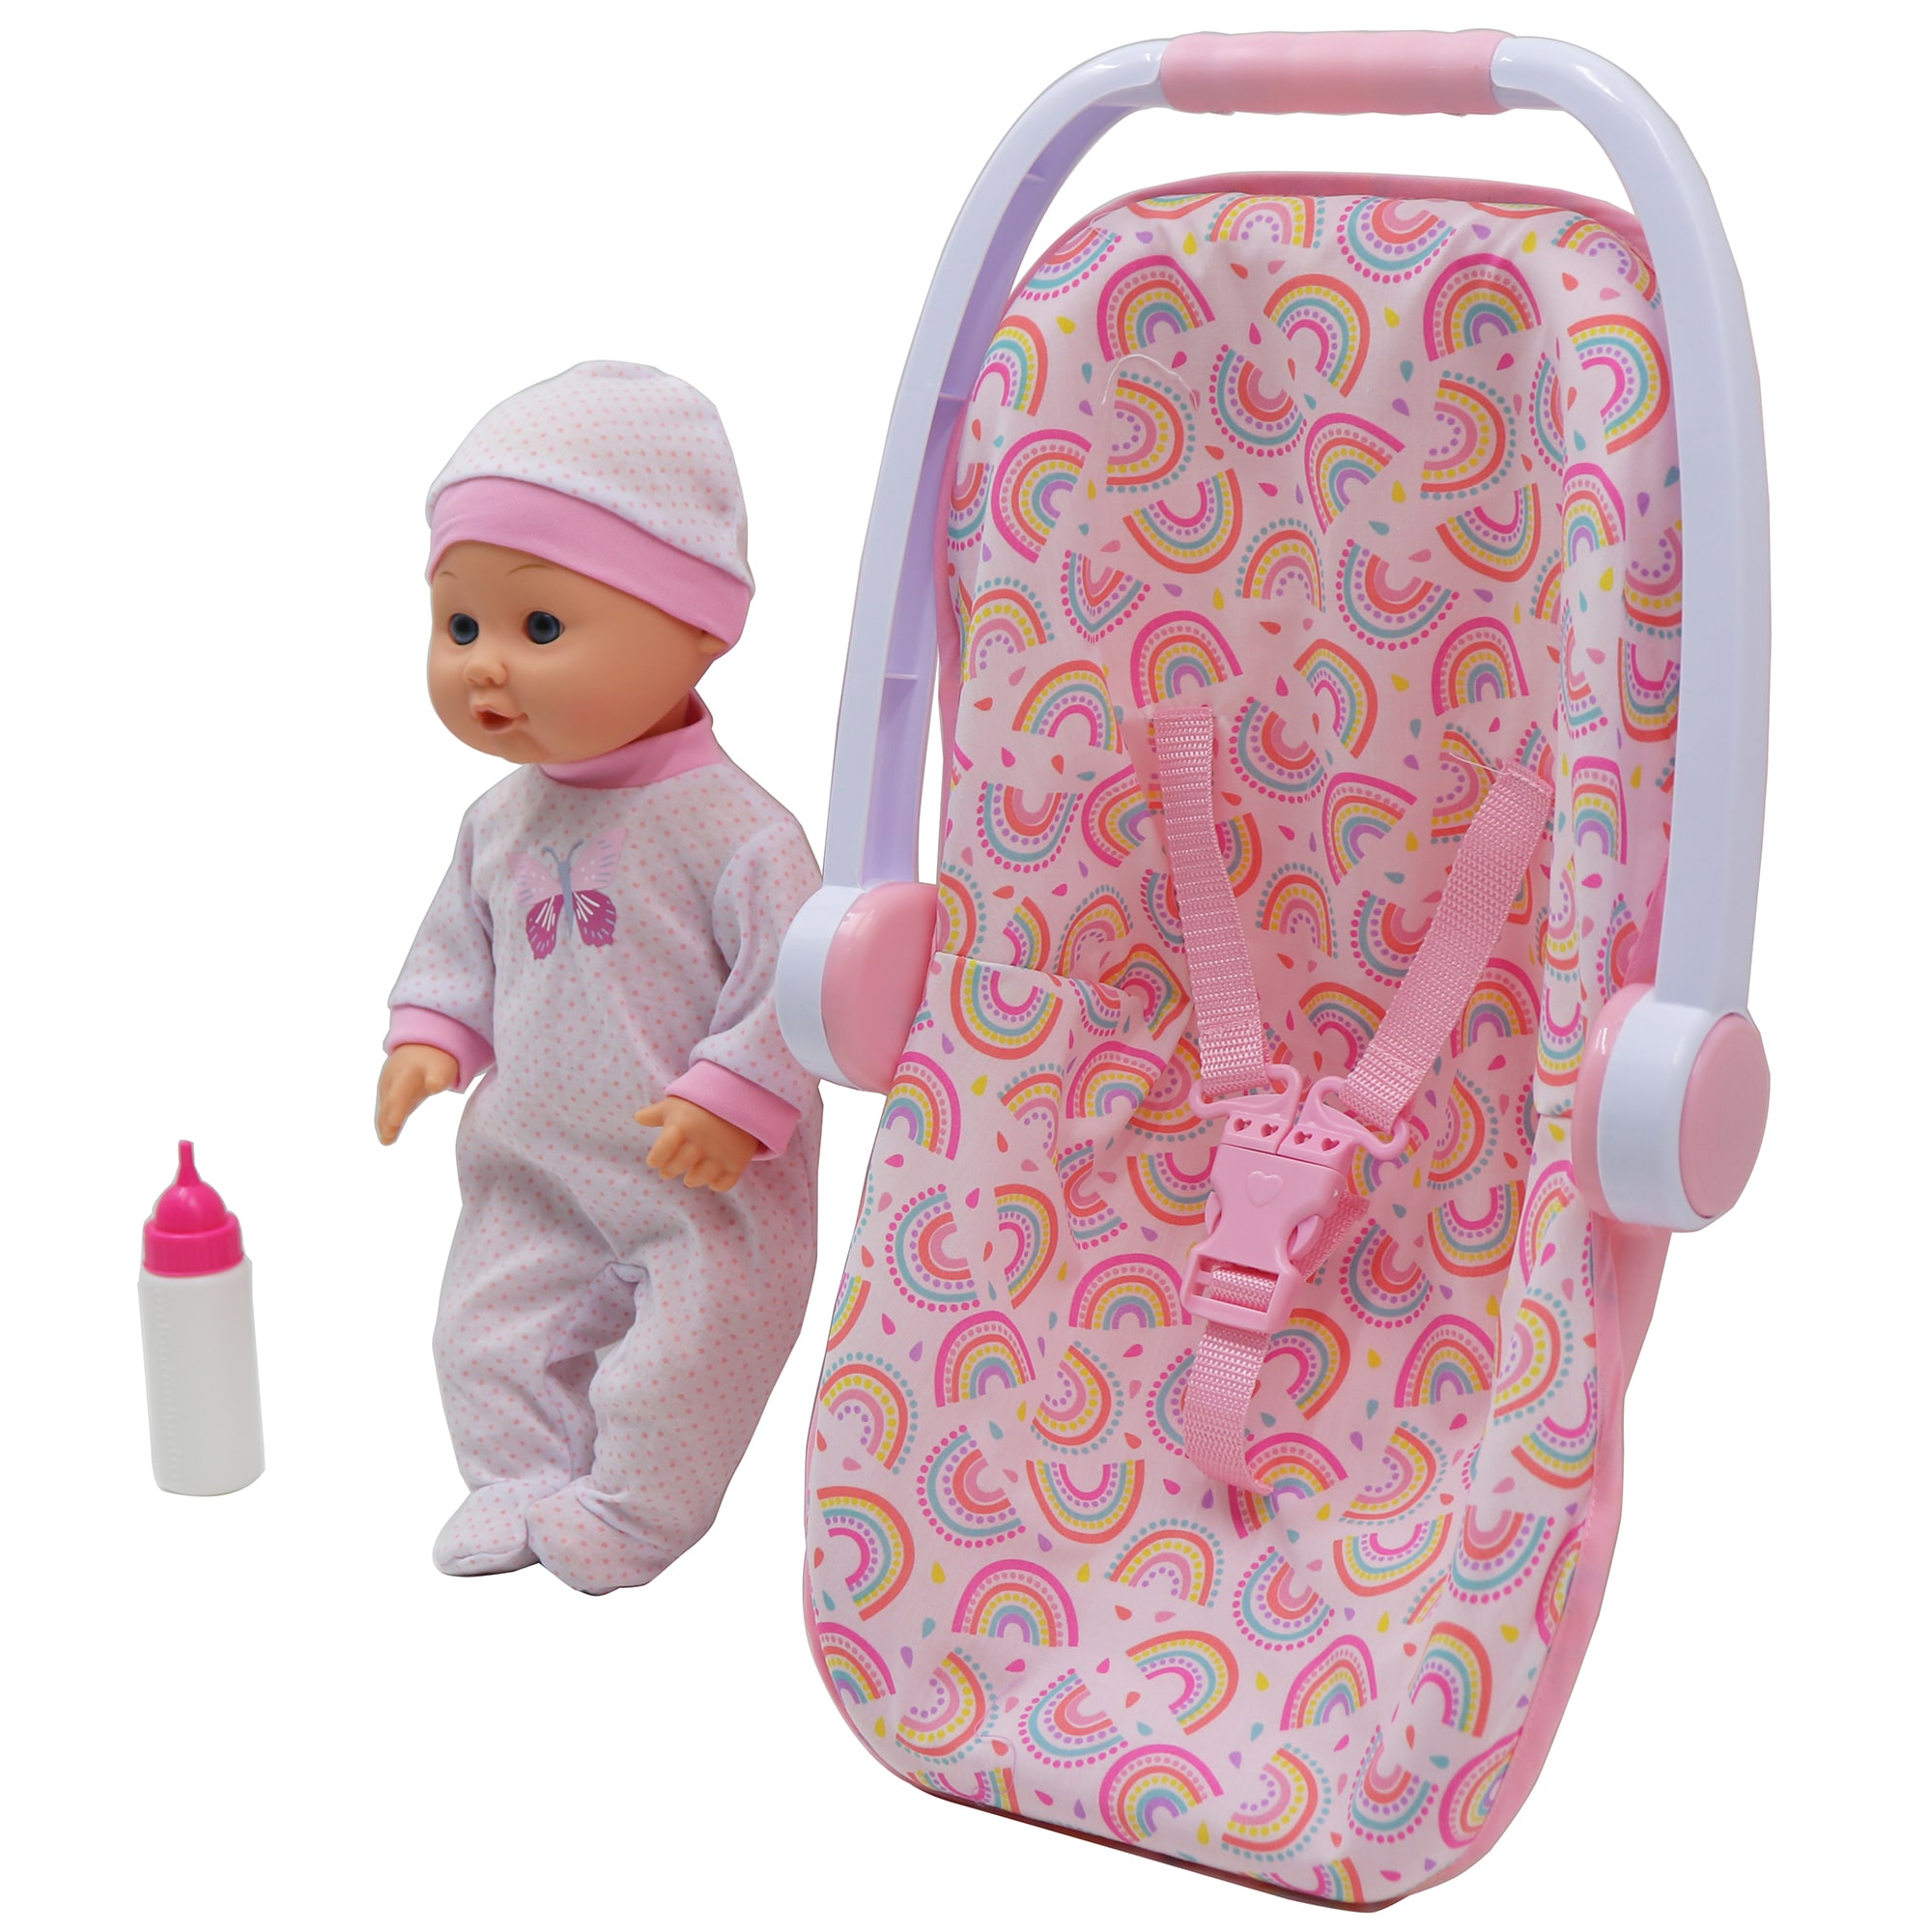 Gigo Toys Role Play 16 Inch Baby Doll Set with Carrier, Milk Bottle ...